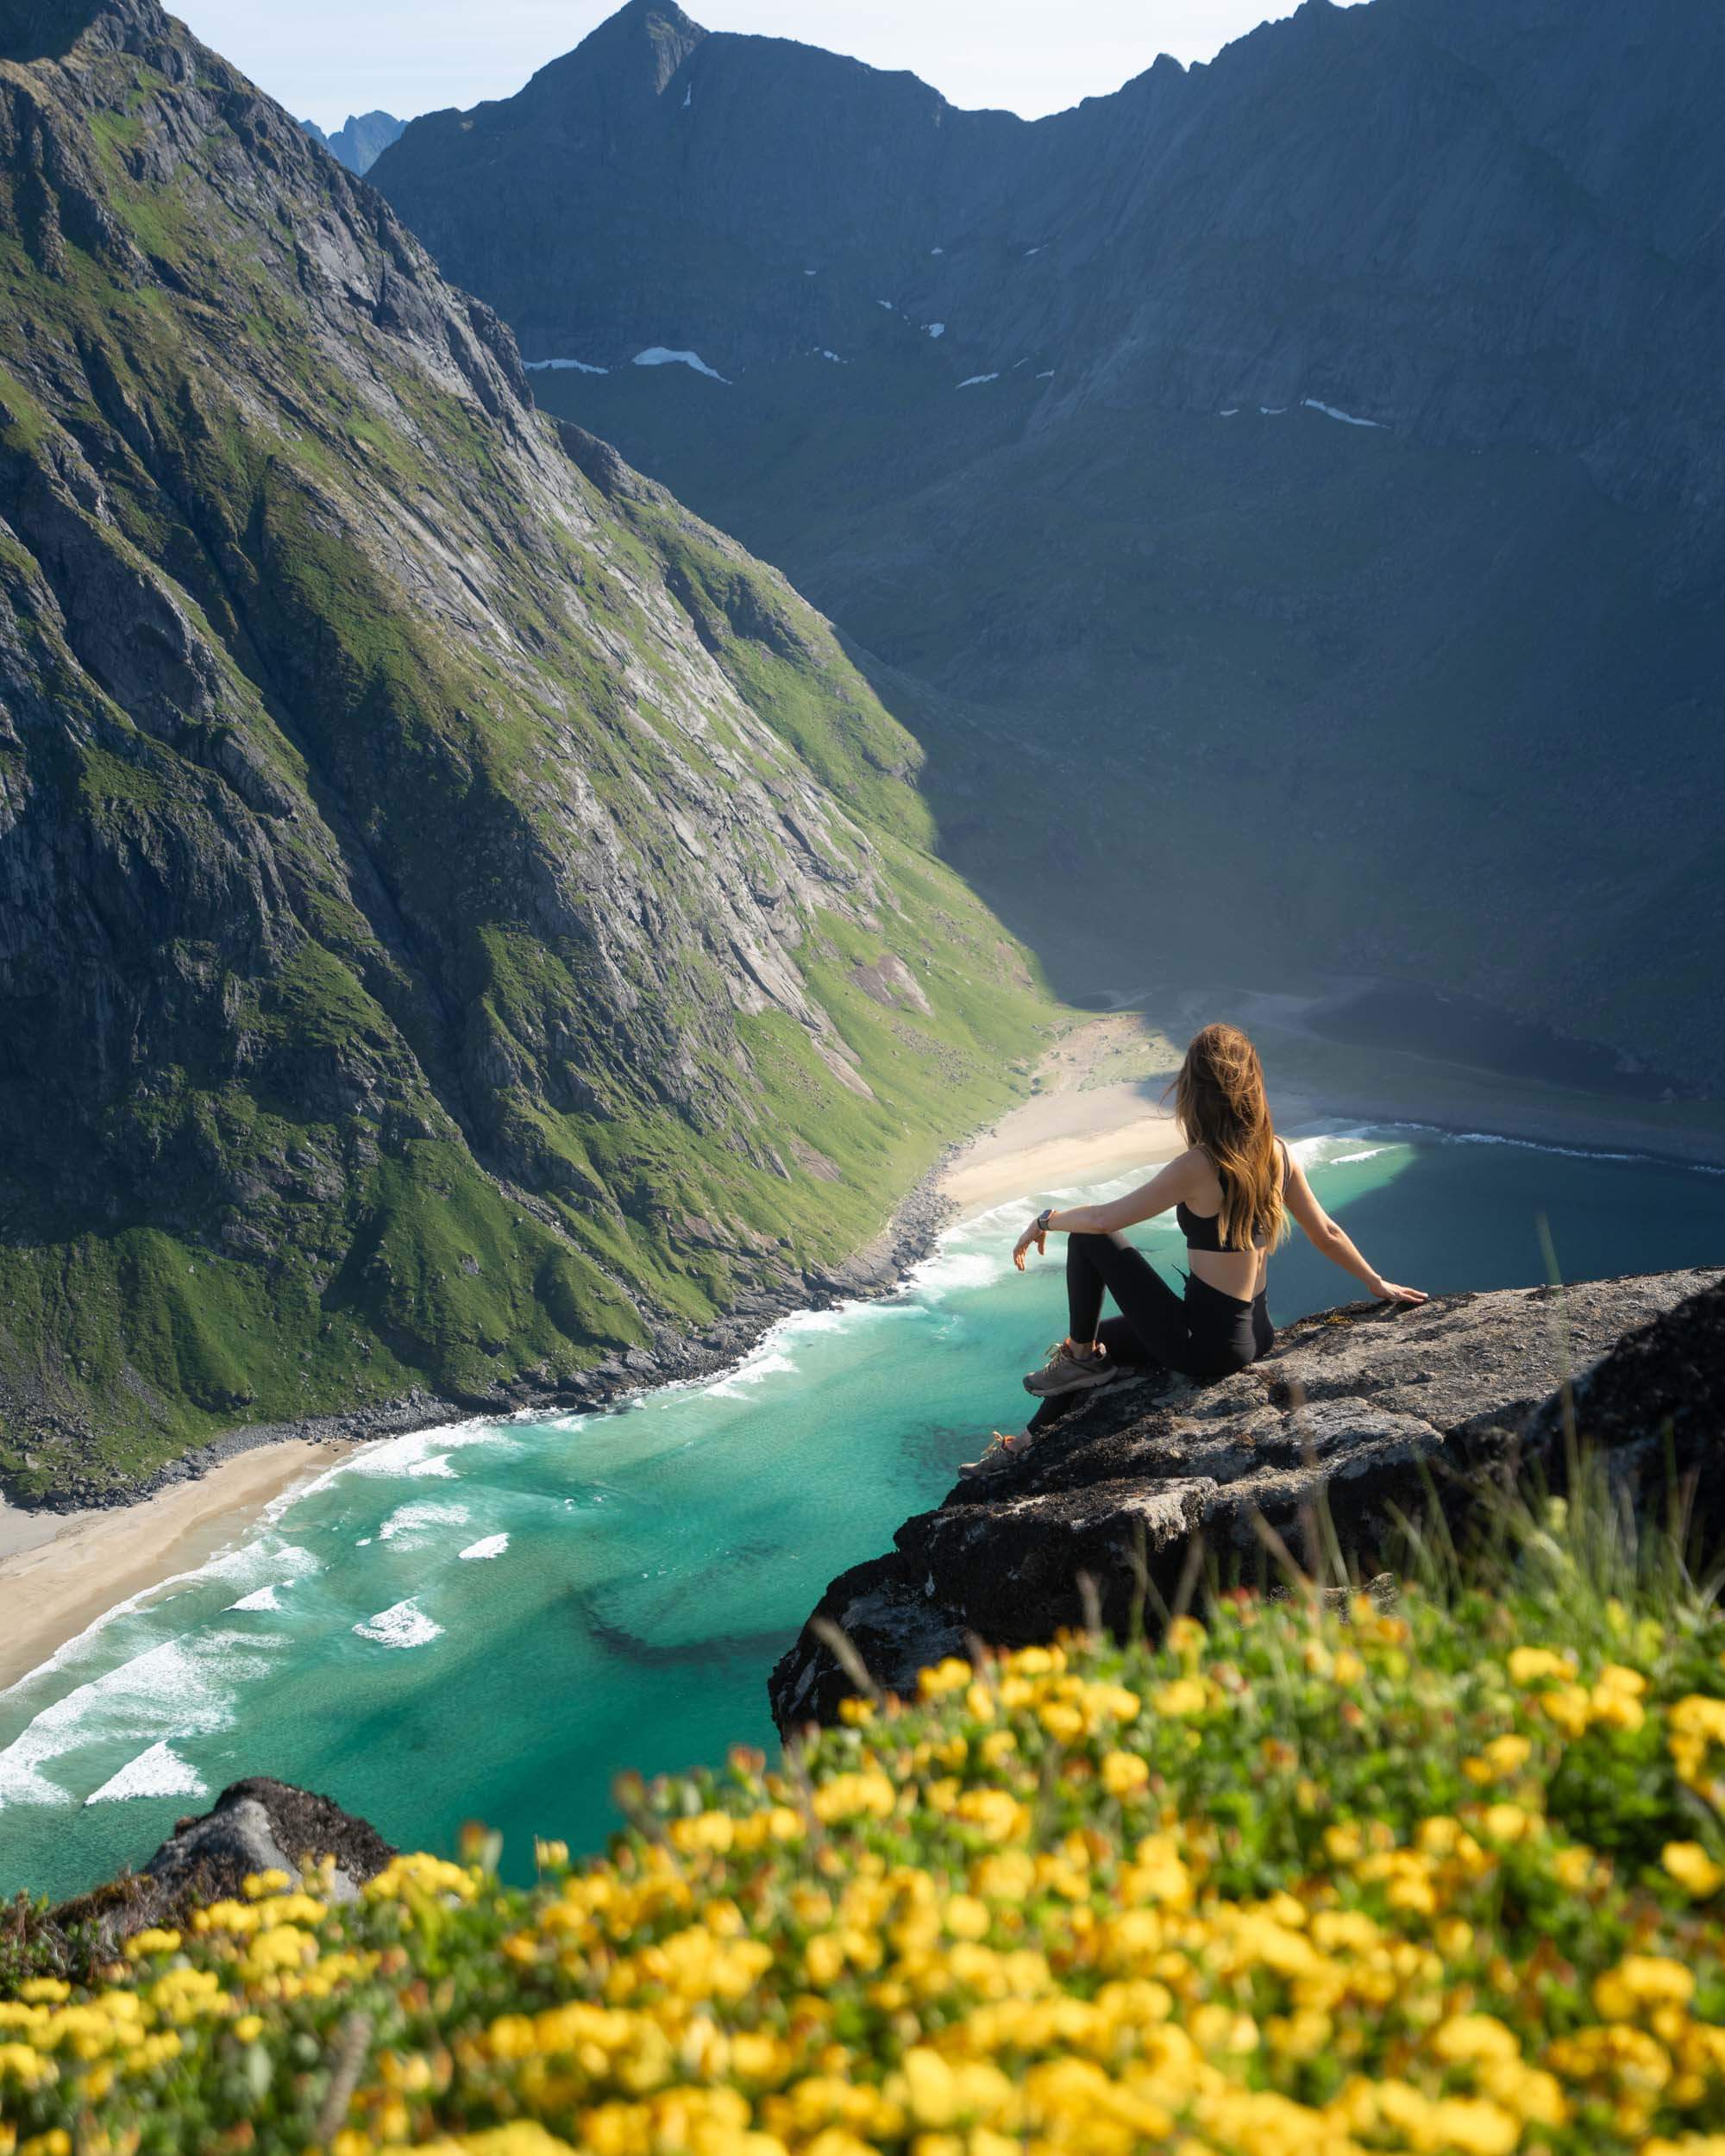 Jess Wandering enjoying the view of Kvalvika Beach from the Ryken trail, one of the best hikes in the Lofoten Islands